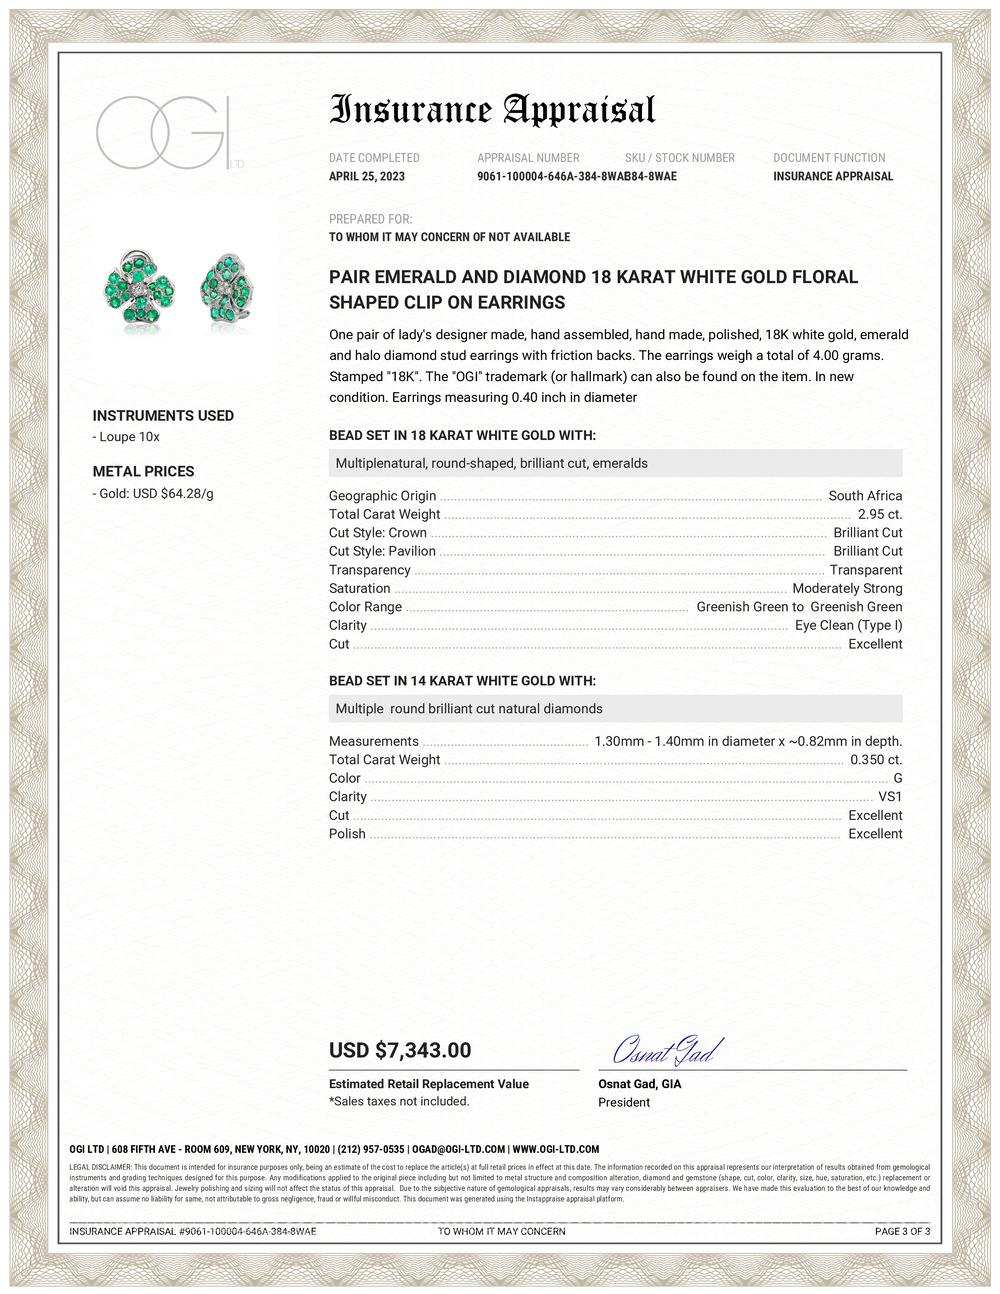 Introducing the exquisite Emerald, weighing 2.95 carat,and Diamond, weighing 0.35 carat, Floral Clip-on Earrings, a true embodiment of luxury and elegance. Crafted with precision and finesse, these earrings are designed to captivate the senses and